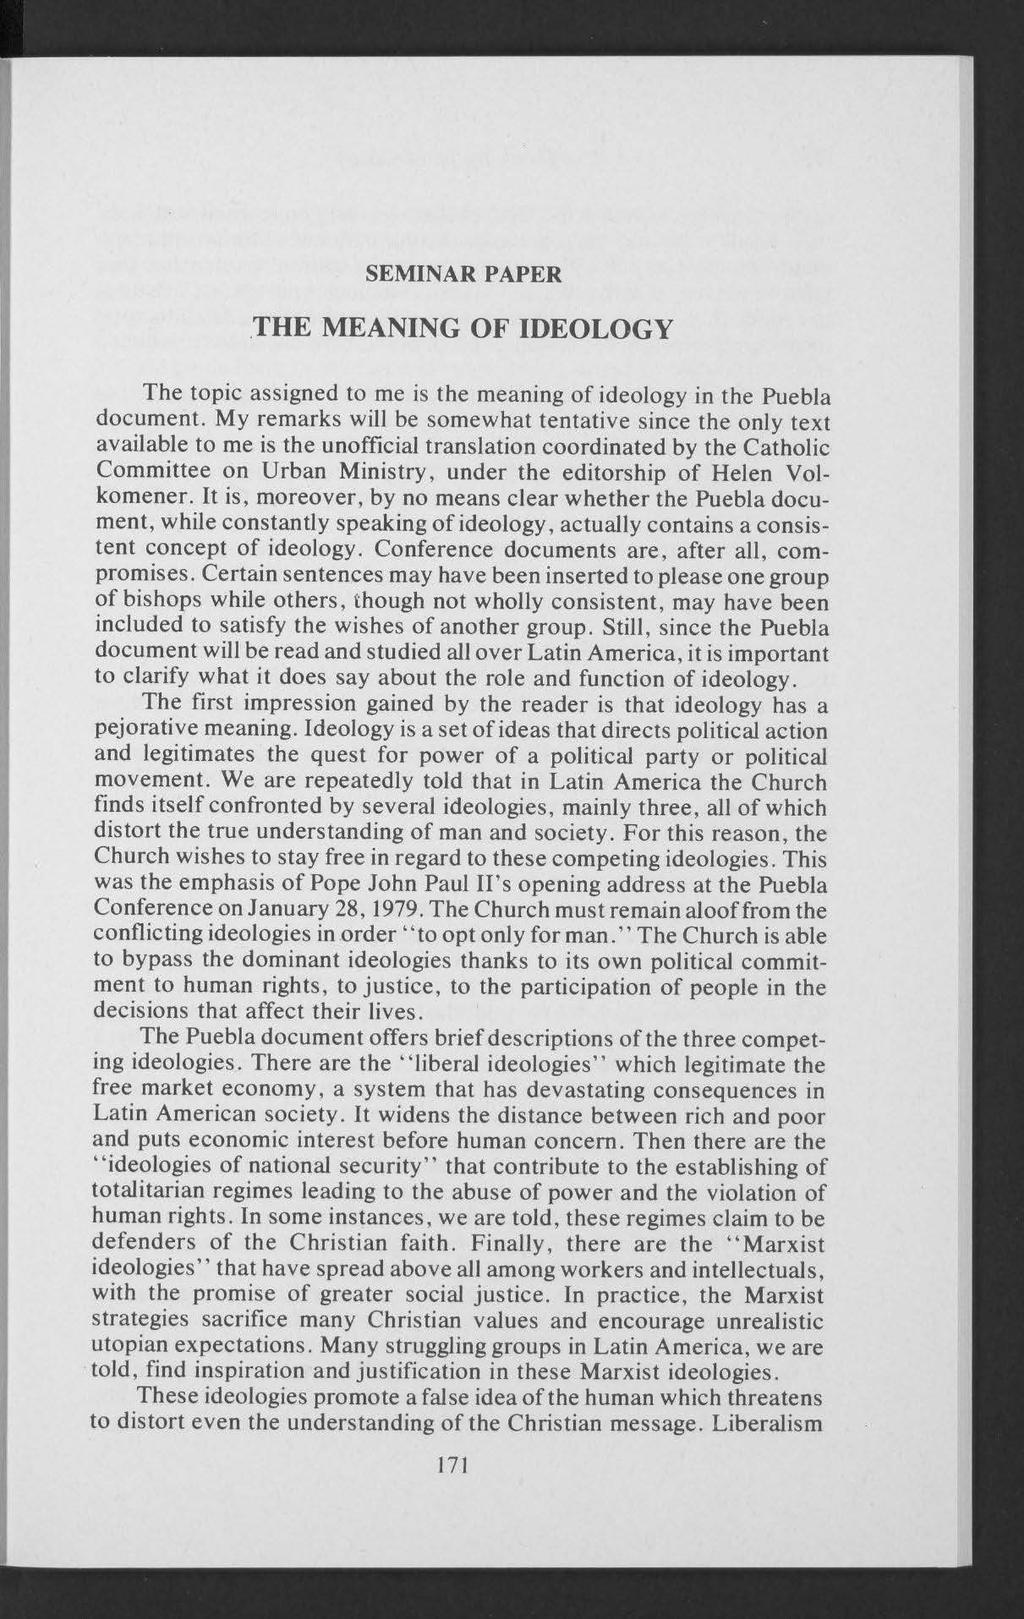 SEMINAR PAPER THE MEANING OF IDEOLOGY The topic assigned to me is the meaning of ideology in the Puebla document.